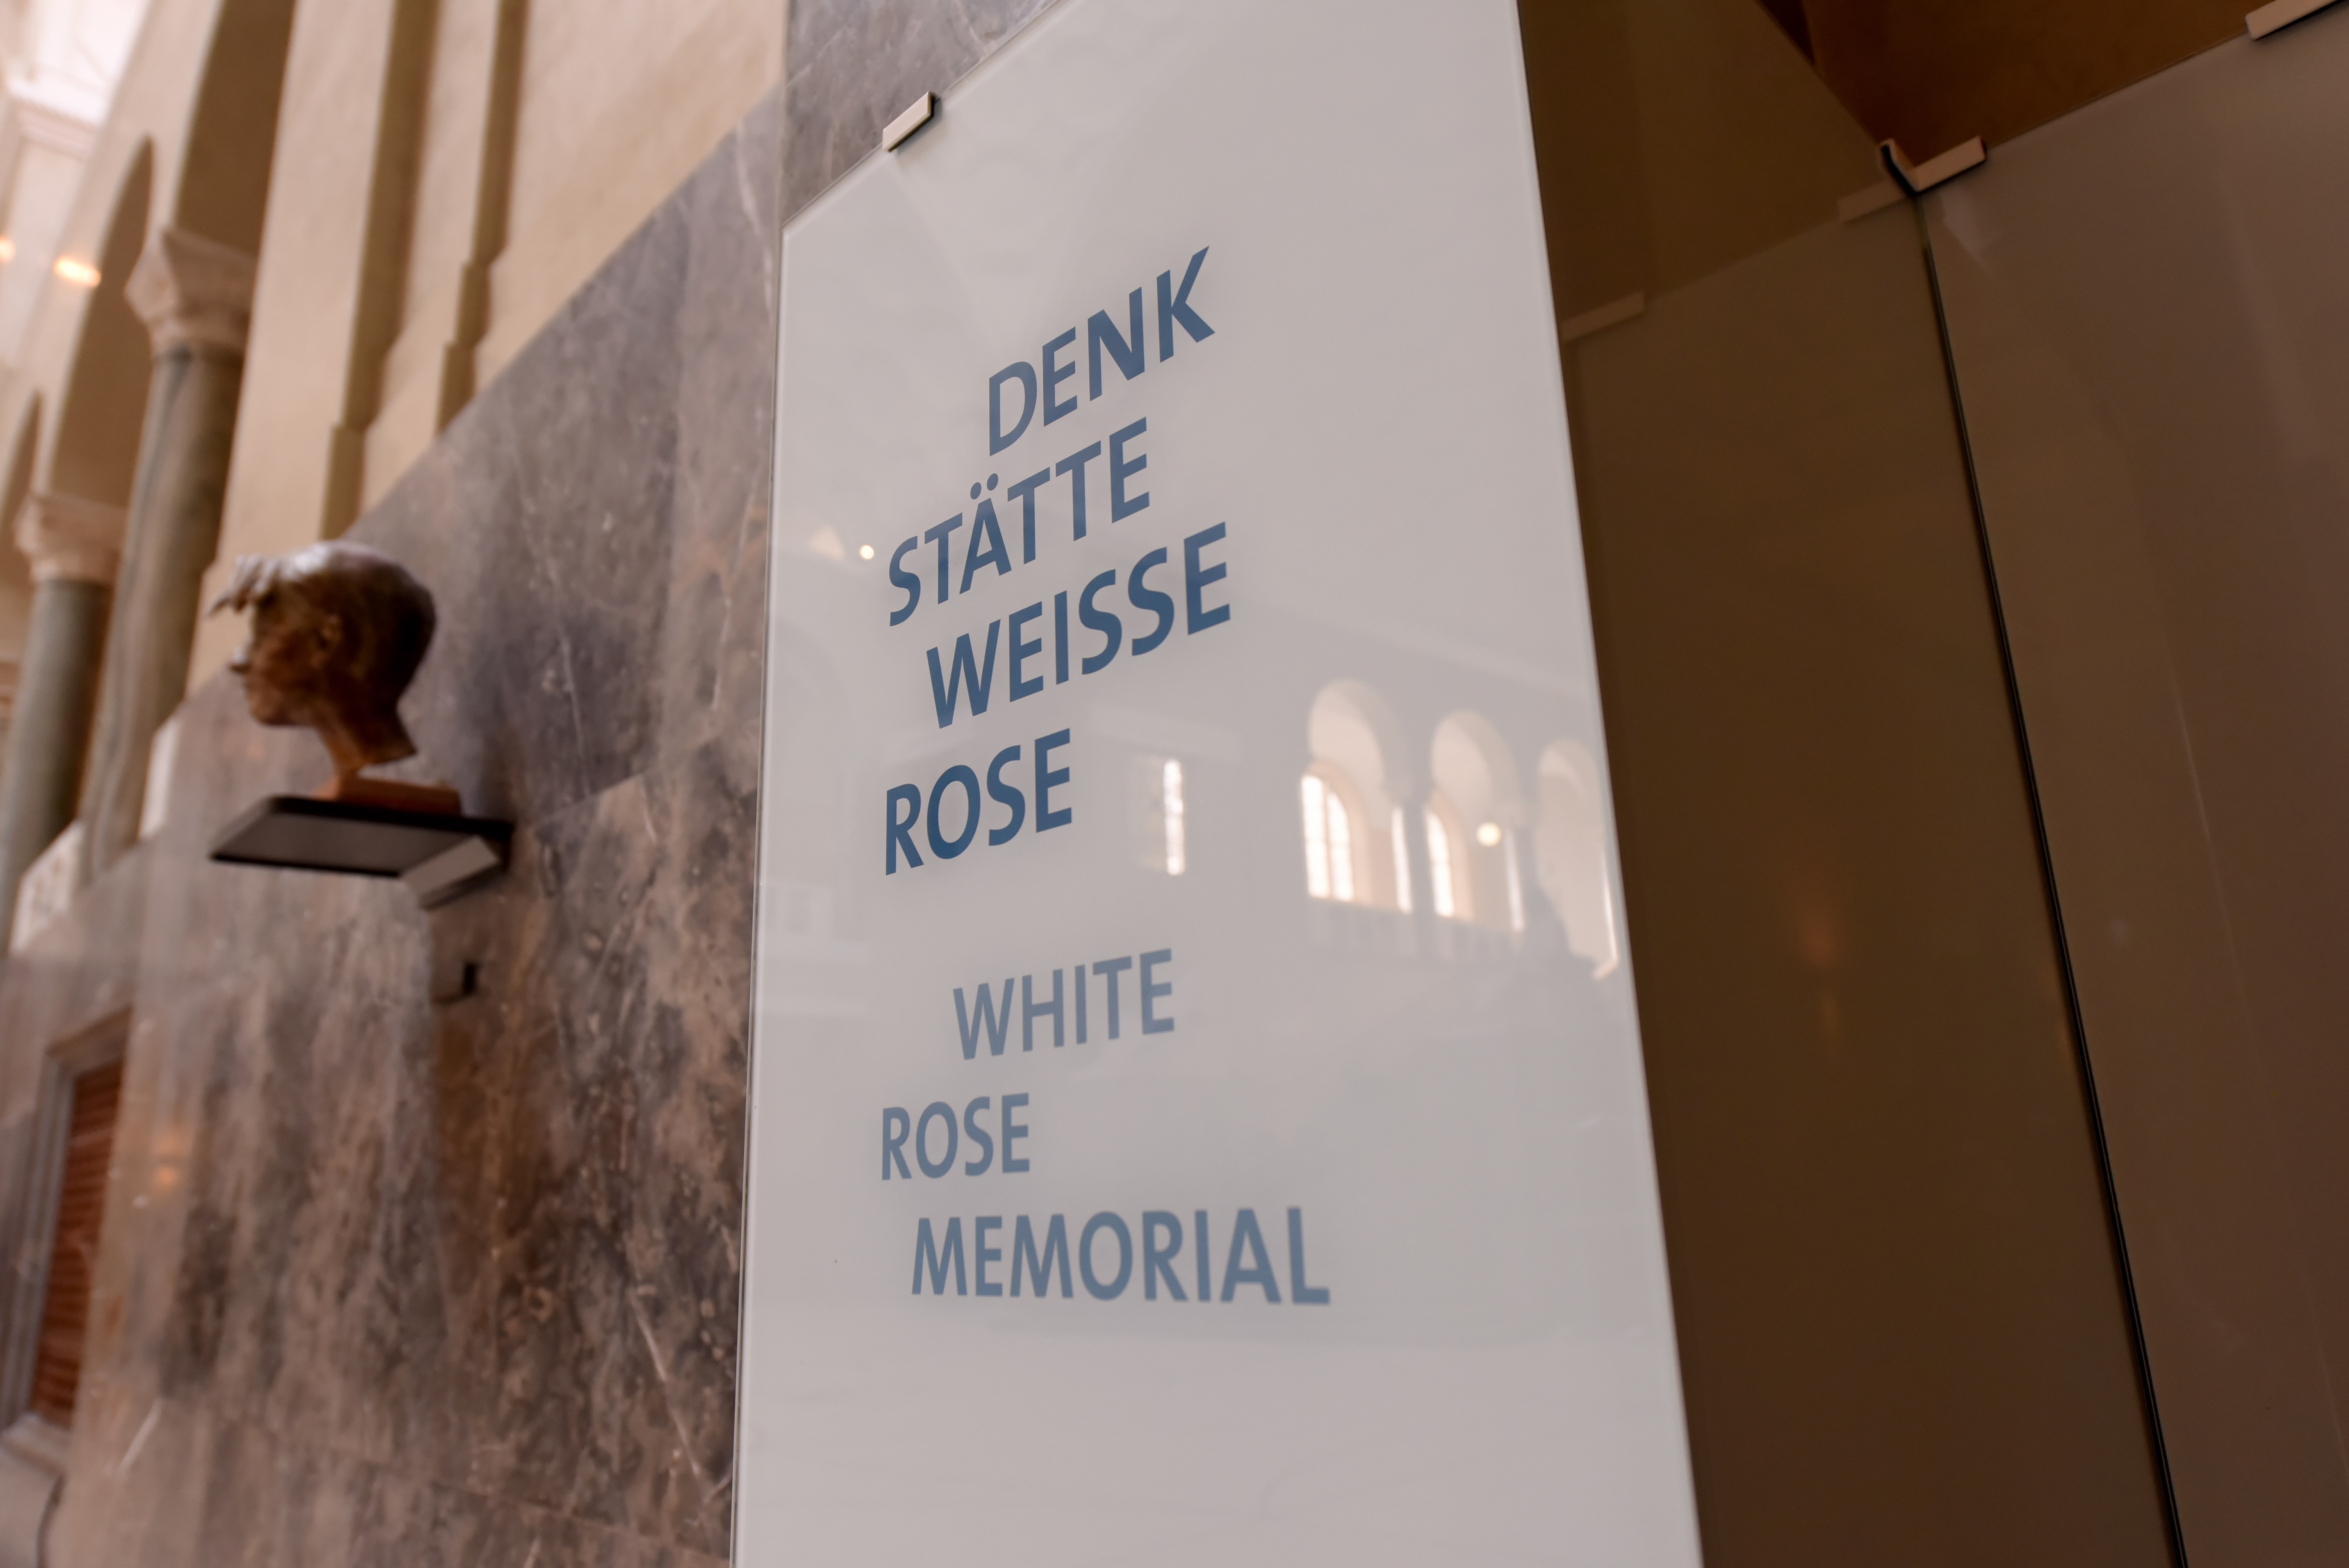 On the trail of the White Rose in Munich